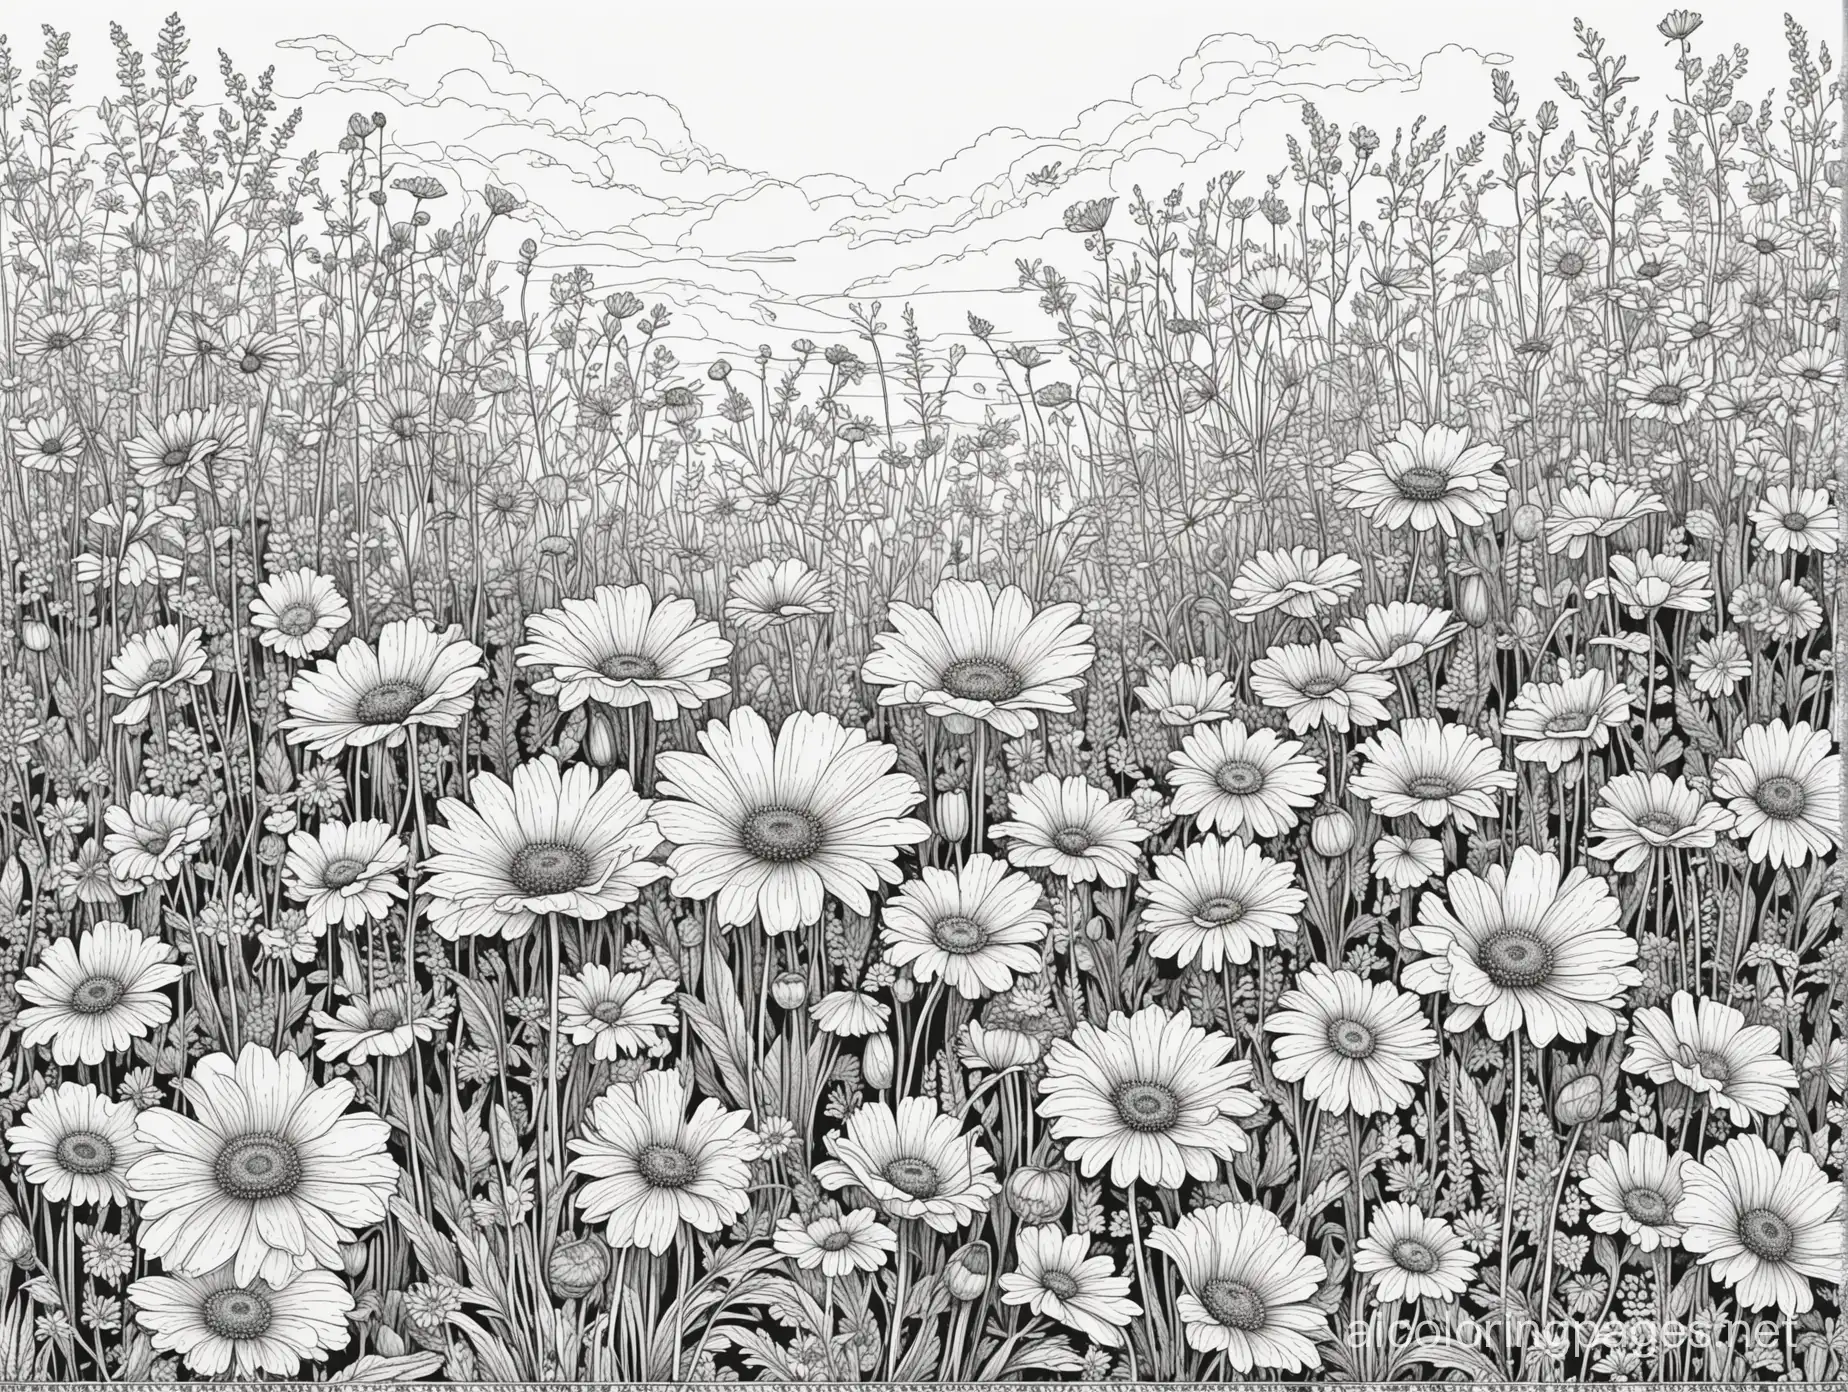 British-Garden-Sketch-Daisies-and-Poppies-in-Black-and-White